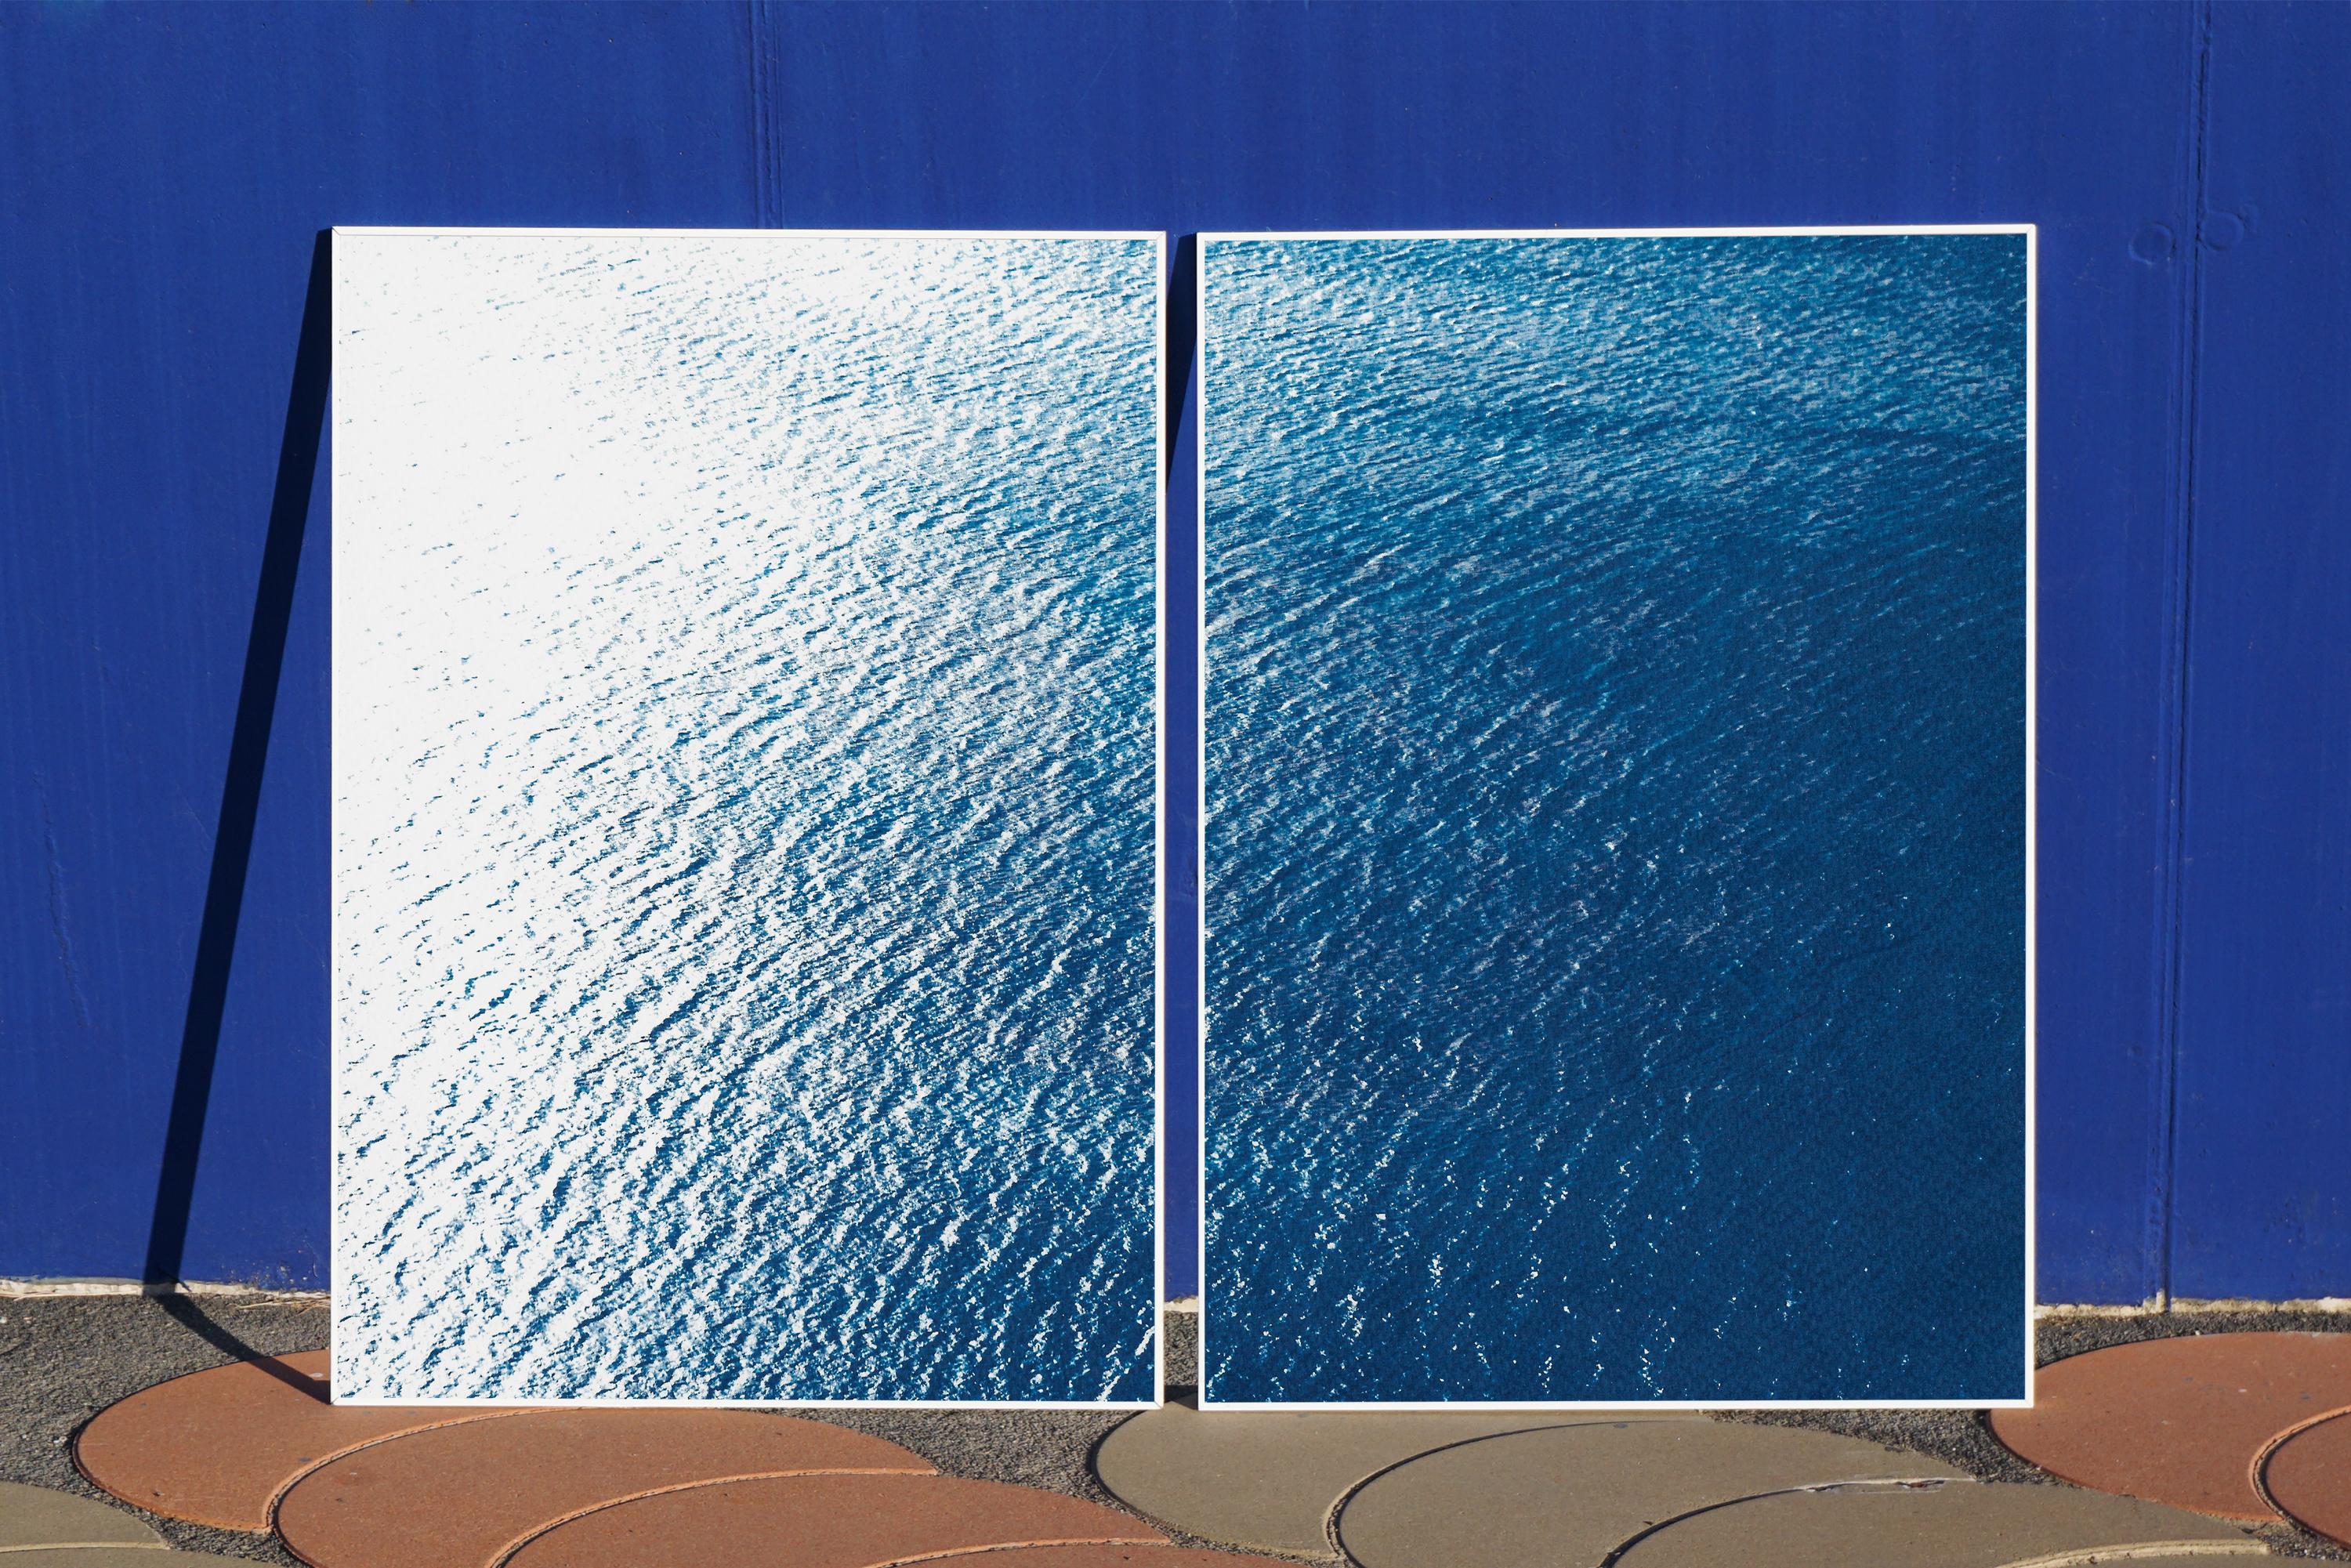 Smooth Bay in the Mediterranean, Classic Blue Diptych, Zen Seascape Coastal Life 2